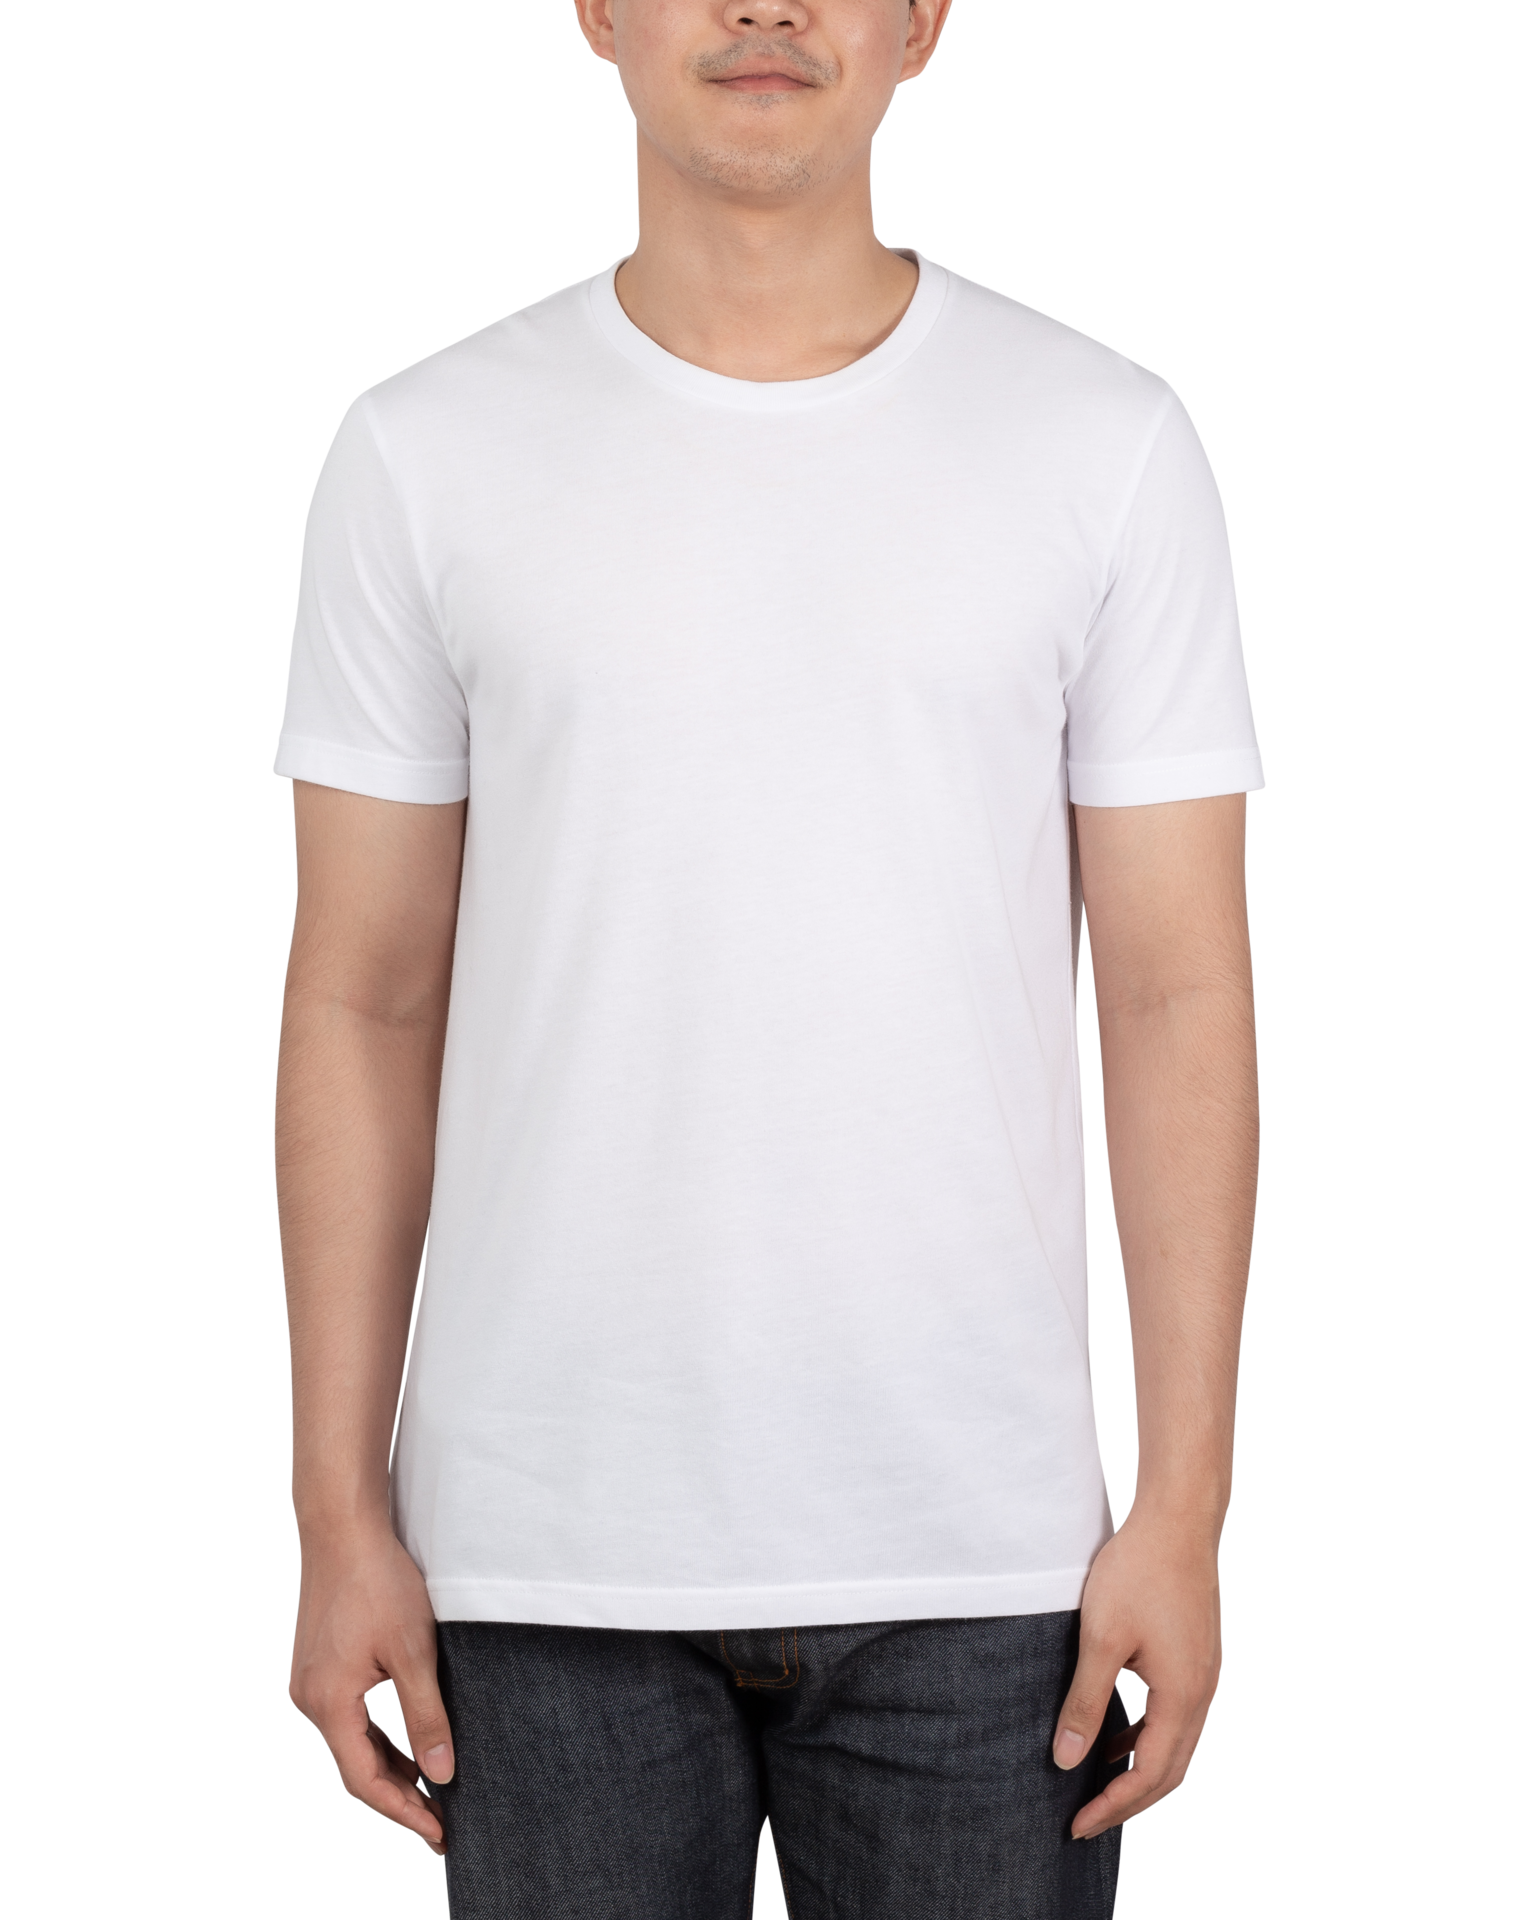 Young man in T shirt mockup, Template for your design 8472327 PNG